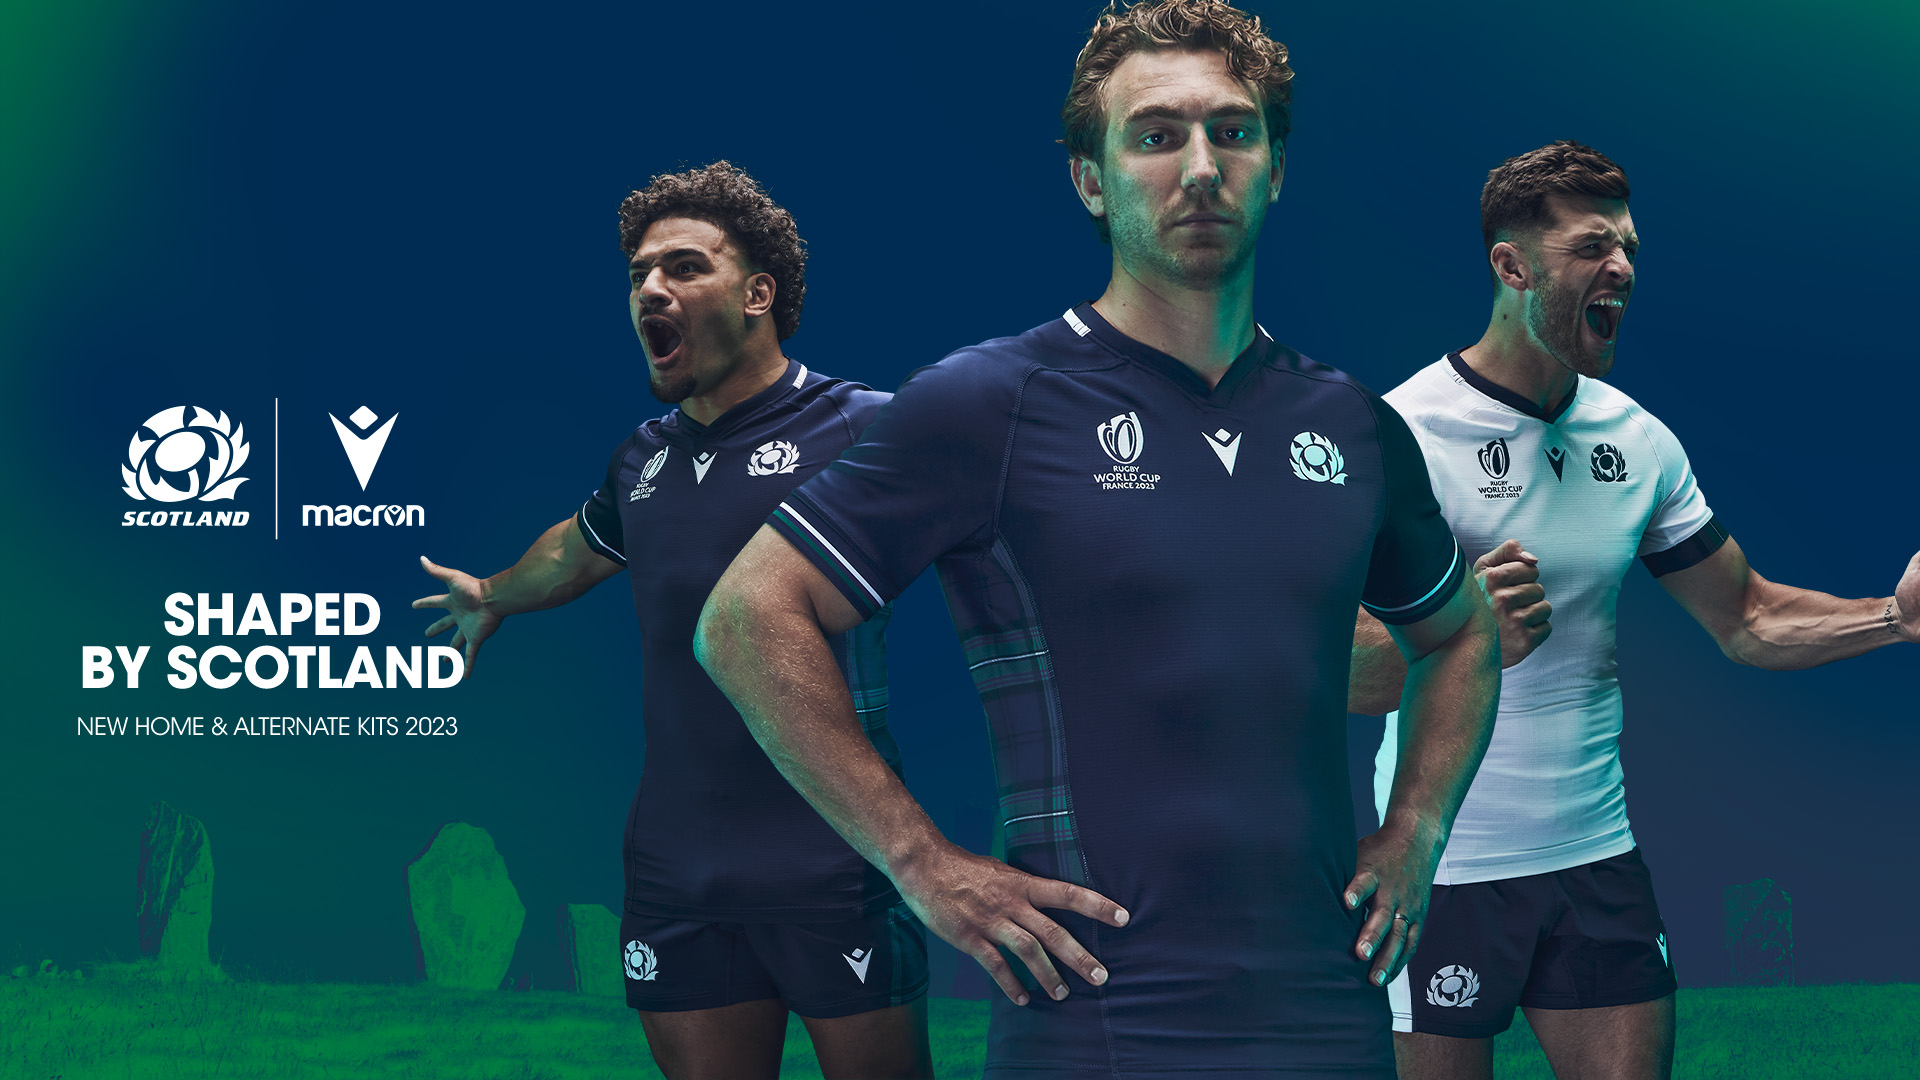 The Best Rugby Shirt Brands In The World: 2023 Edition